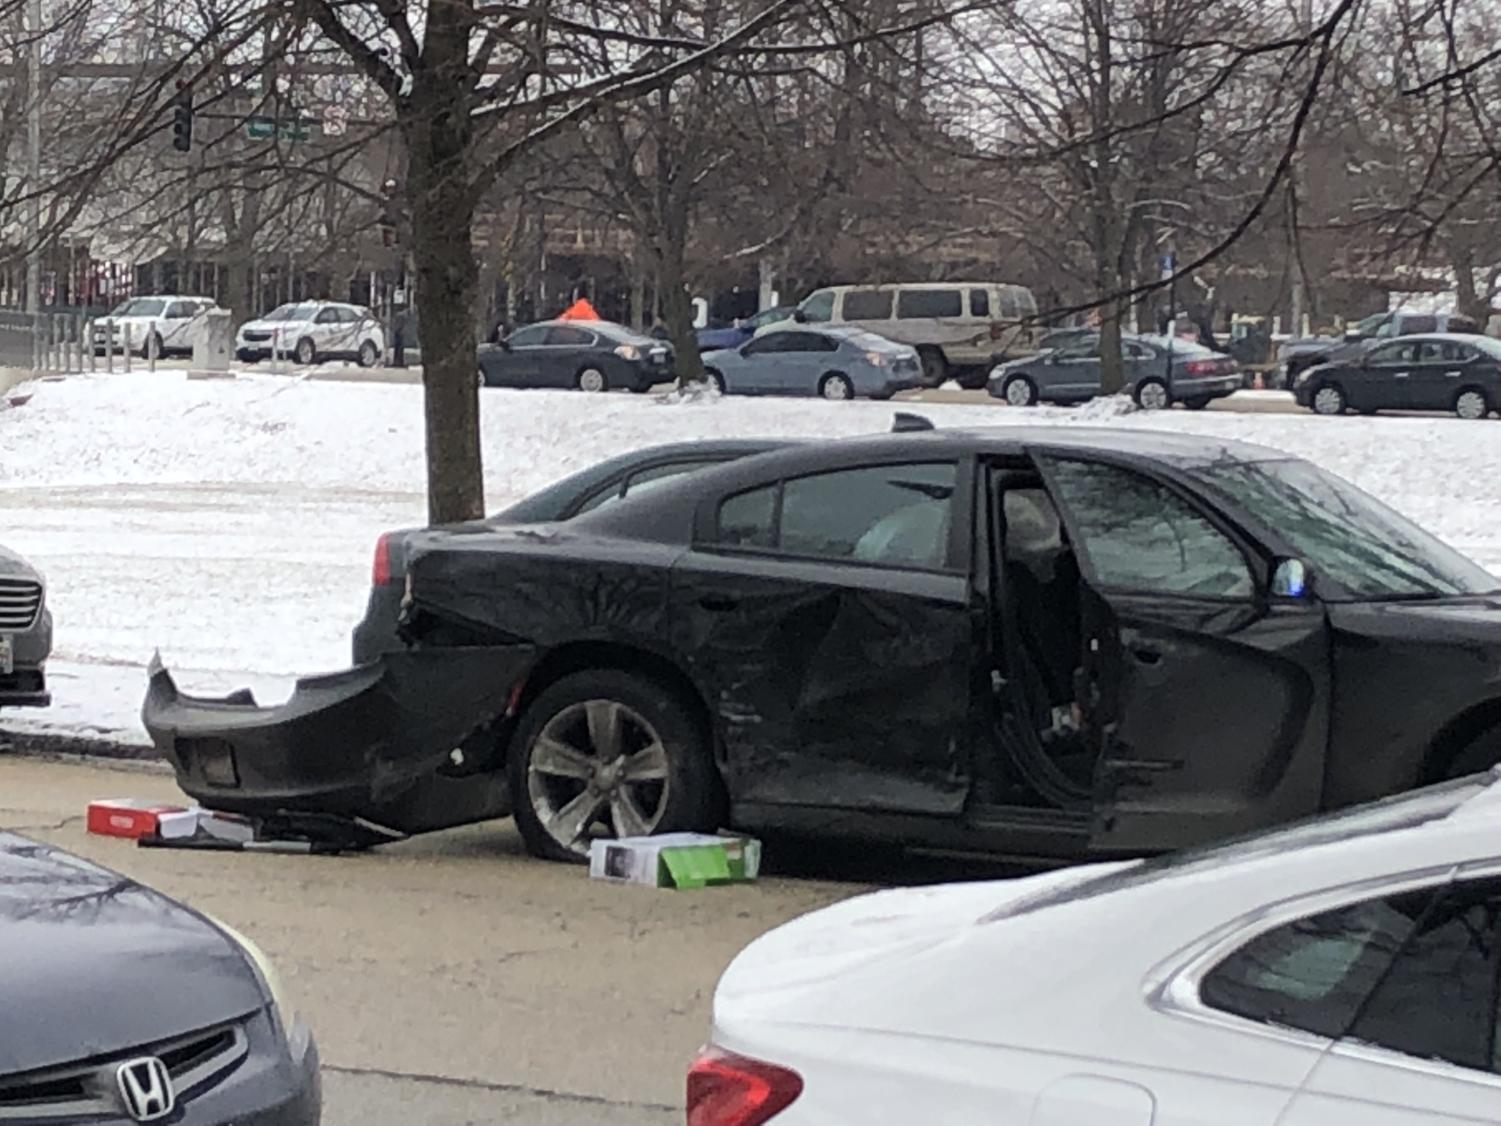 At 1:30 p.m., video game boxes were seen on the ground by the black Dodge Charger on Midway Plaisance near the intersection of South Woodlawn Avenue.